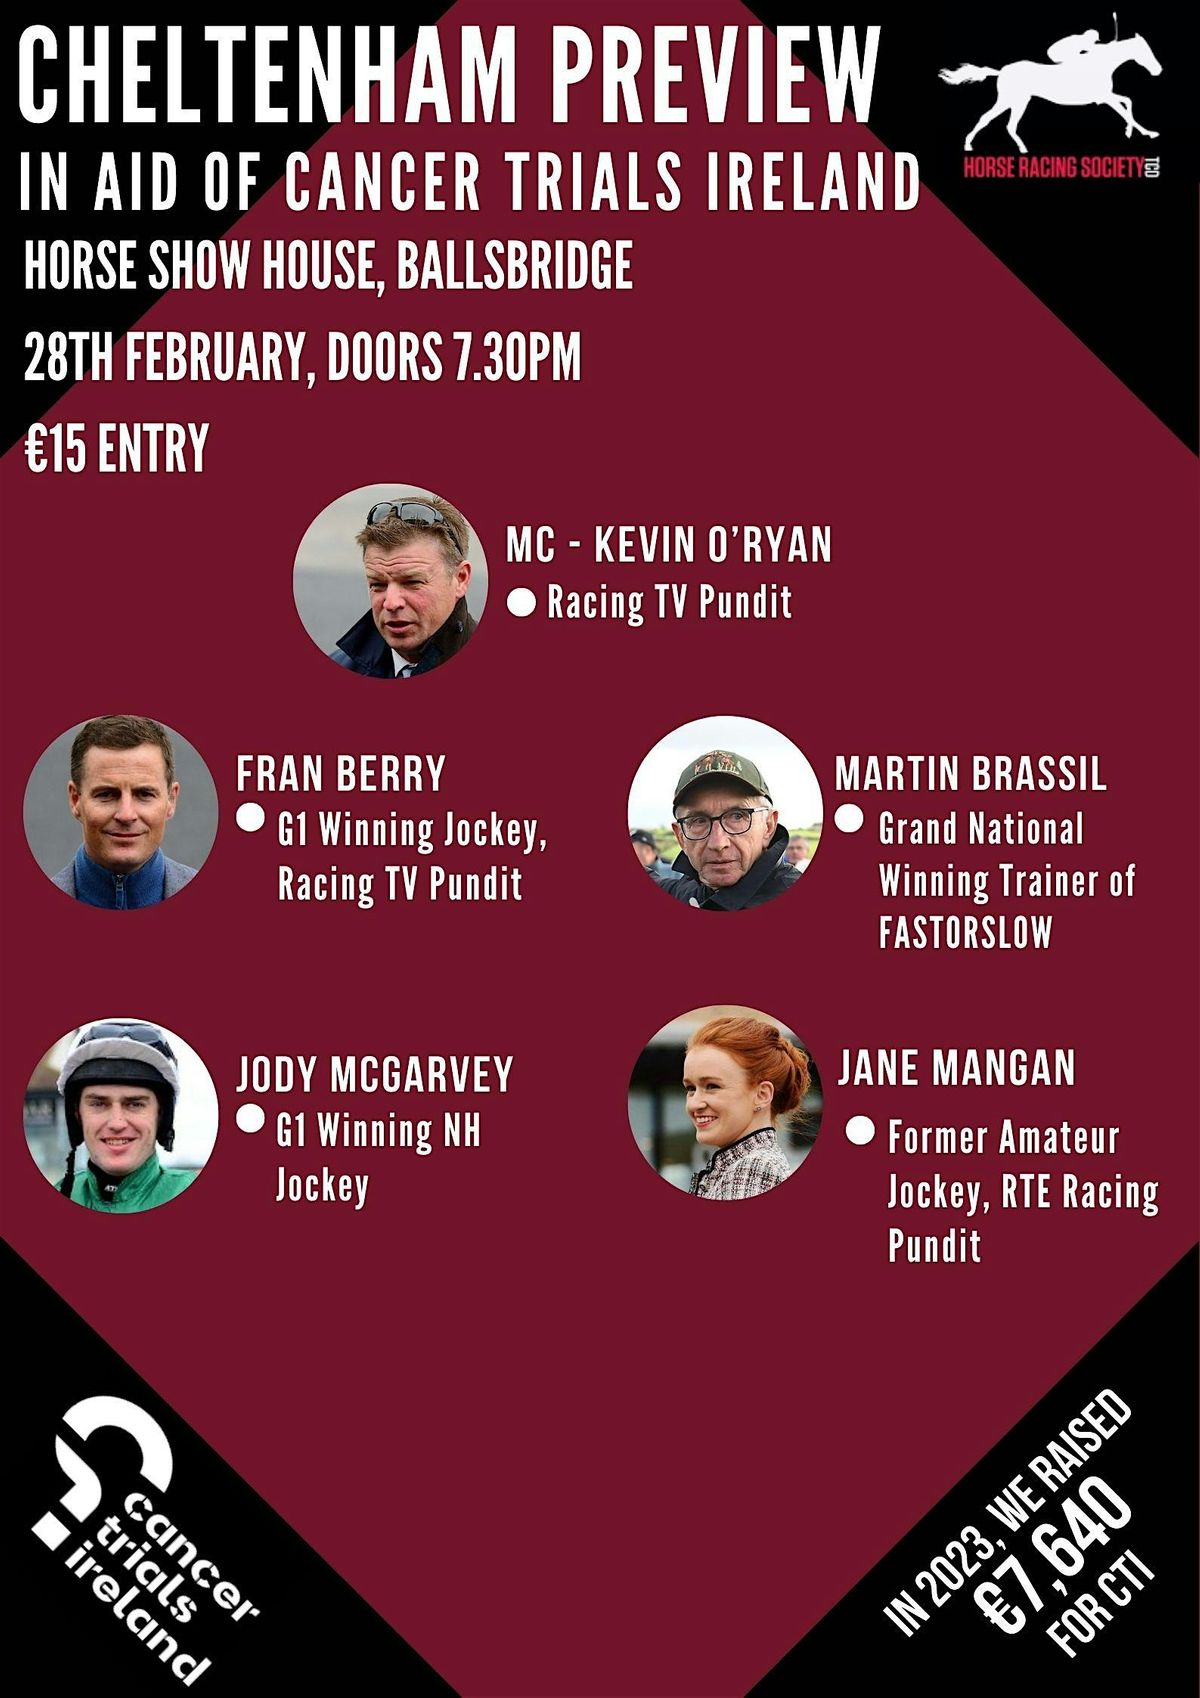 Cheltenham Preview Night in Aid of Cancer Trials Ireland